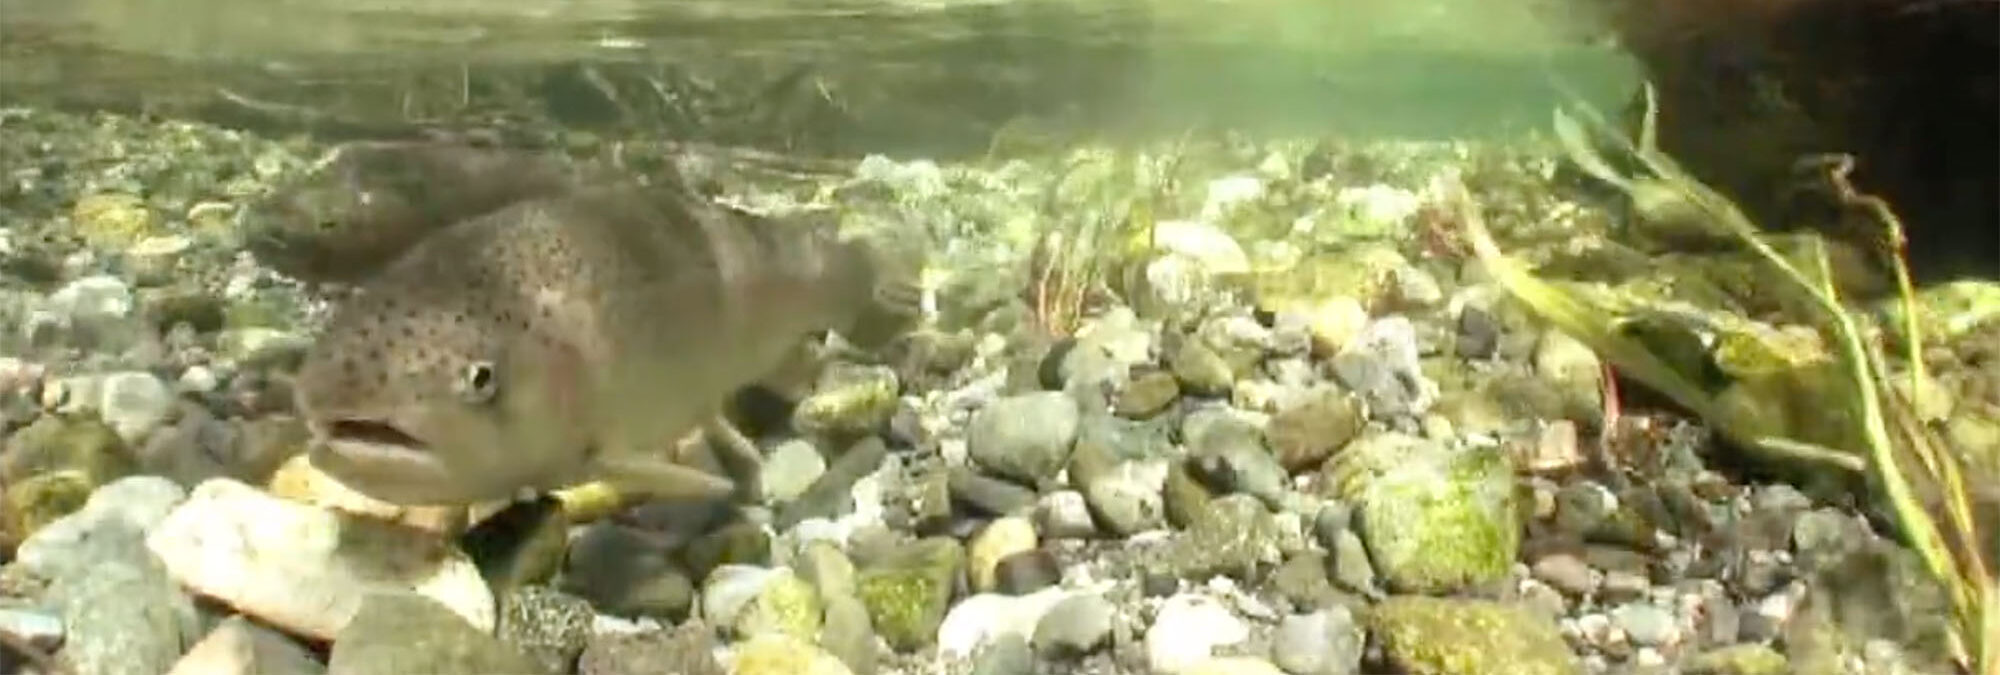 underwater view of fish in river